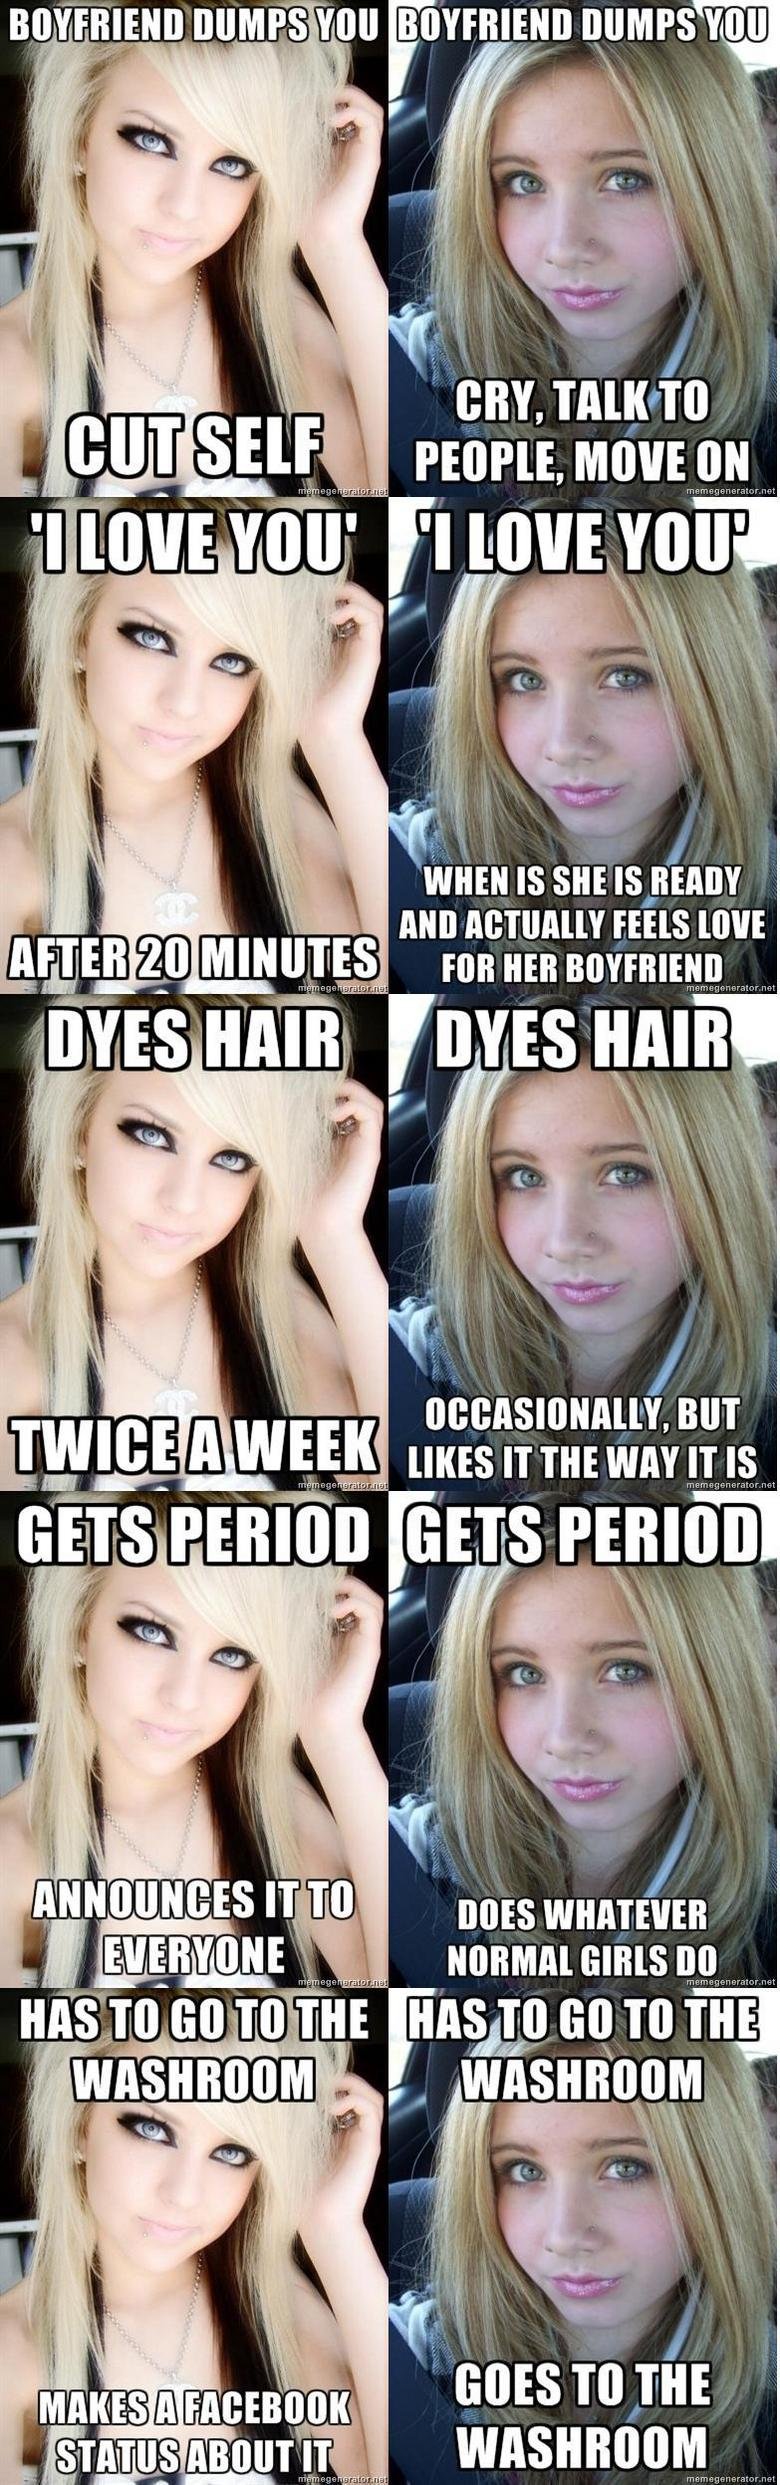 Typical Emo Girl vs Normal Teenage Girl. Thanks guys. I realise she is 'scene' not 'emo' but the picture is the one a friend of mine used as her display picture